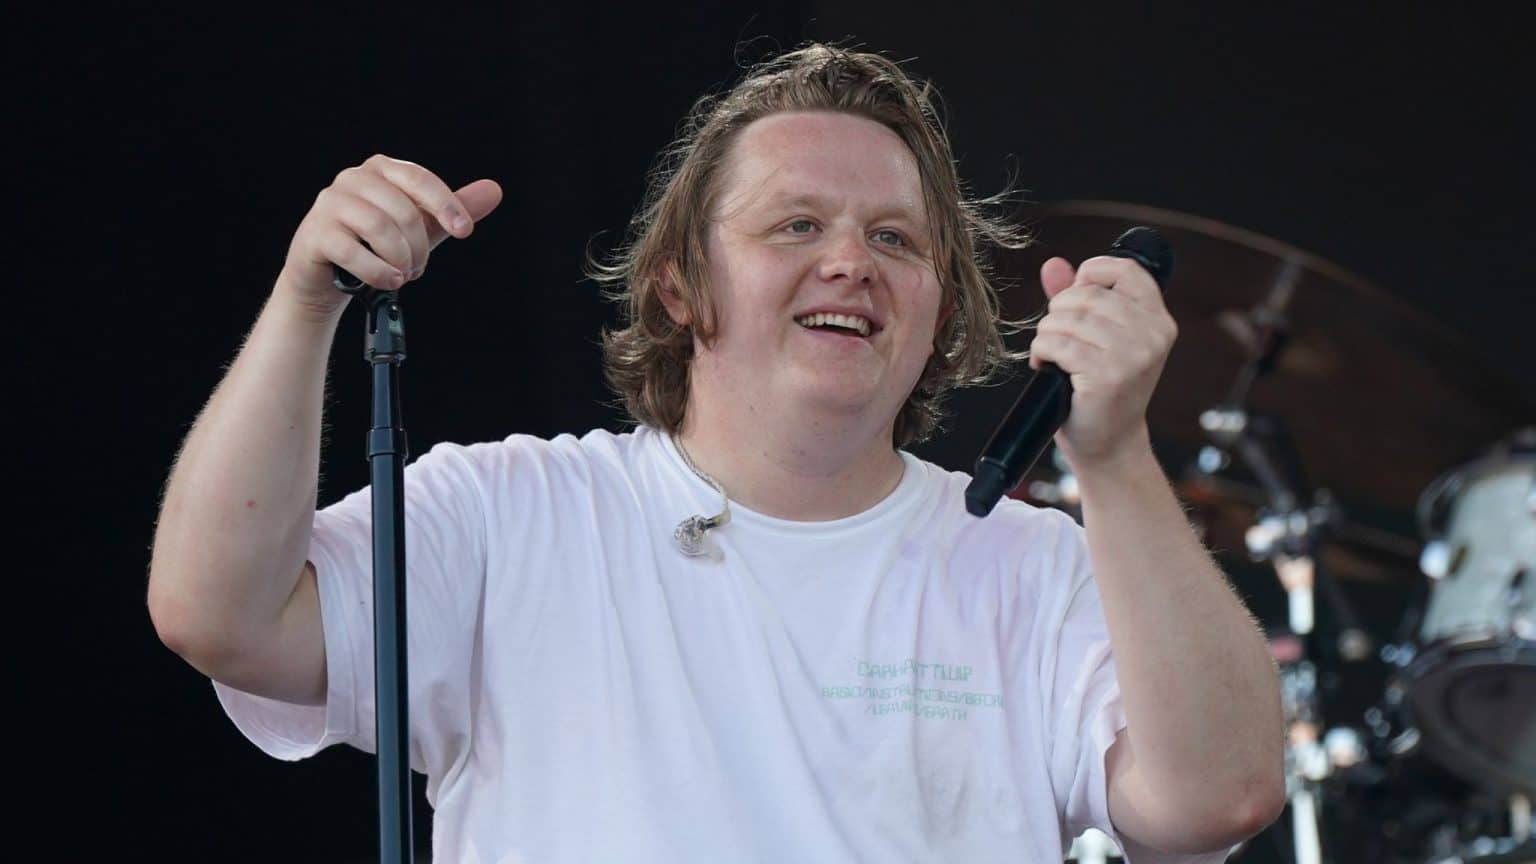 What Happened To Lewis Capaldi? Glastonbury Crowd Sings For The Star